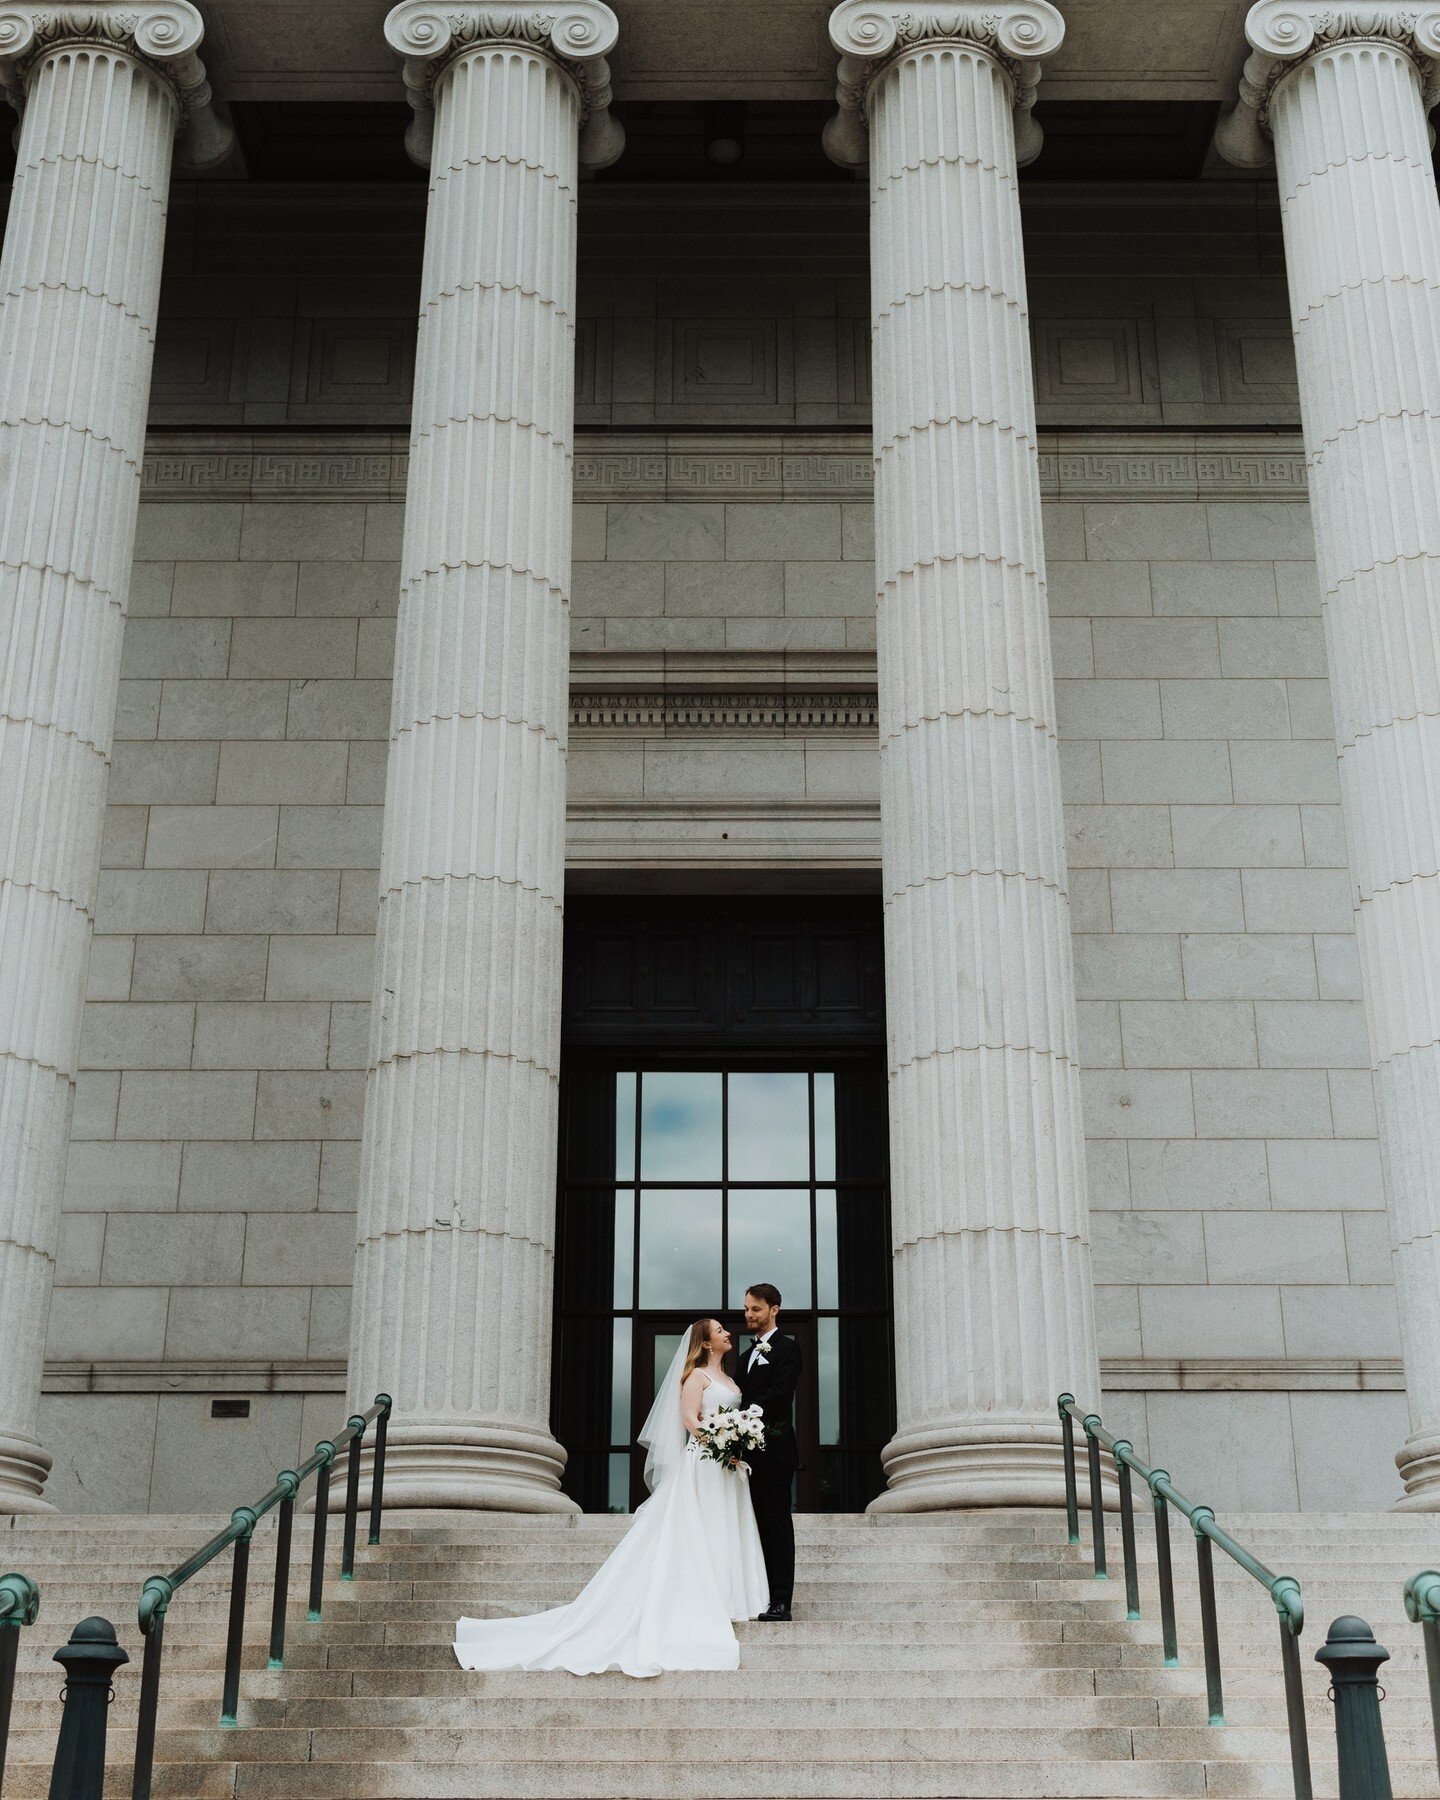 One of my favorite weddings to date. I will always love to take pictures at the Minneapolis Institute of Art. The MIA will forever have a special place in my heart. 

Second shooter for @katlarreaphoto